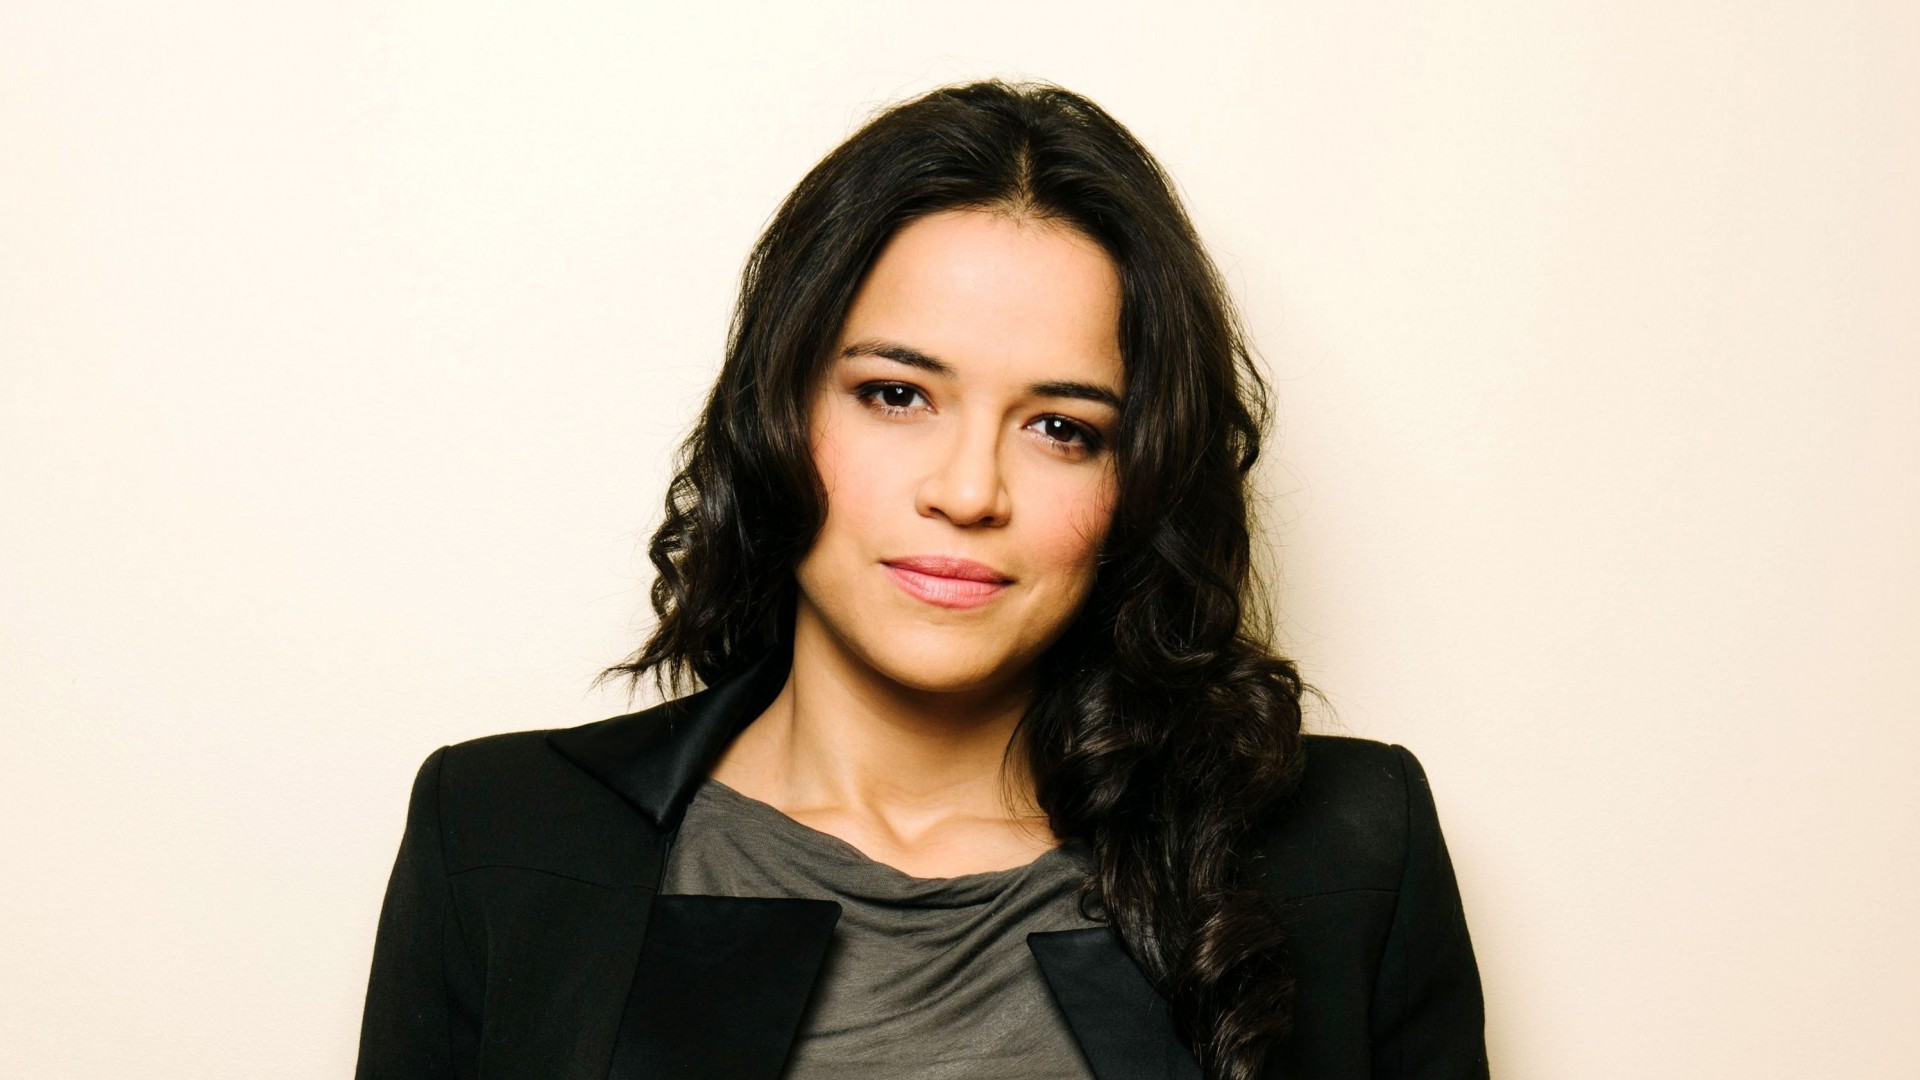 Michelle Rodriguez Wallpaper Image Photos Pictures Background